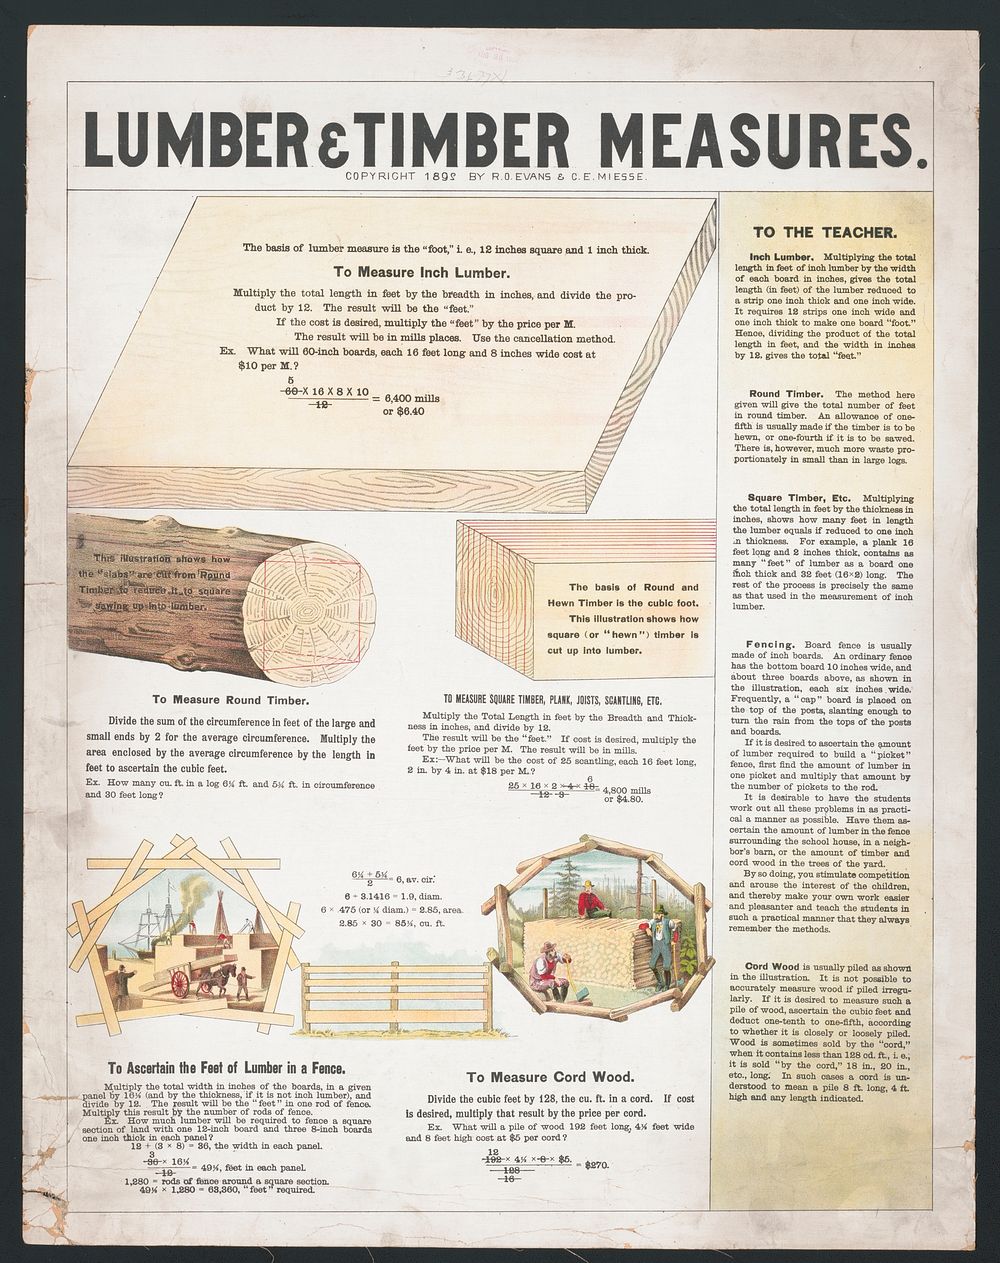 Lumber & timber measures, [United States] : [publisher not transcribed], 1892.